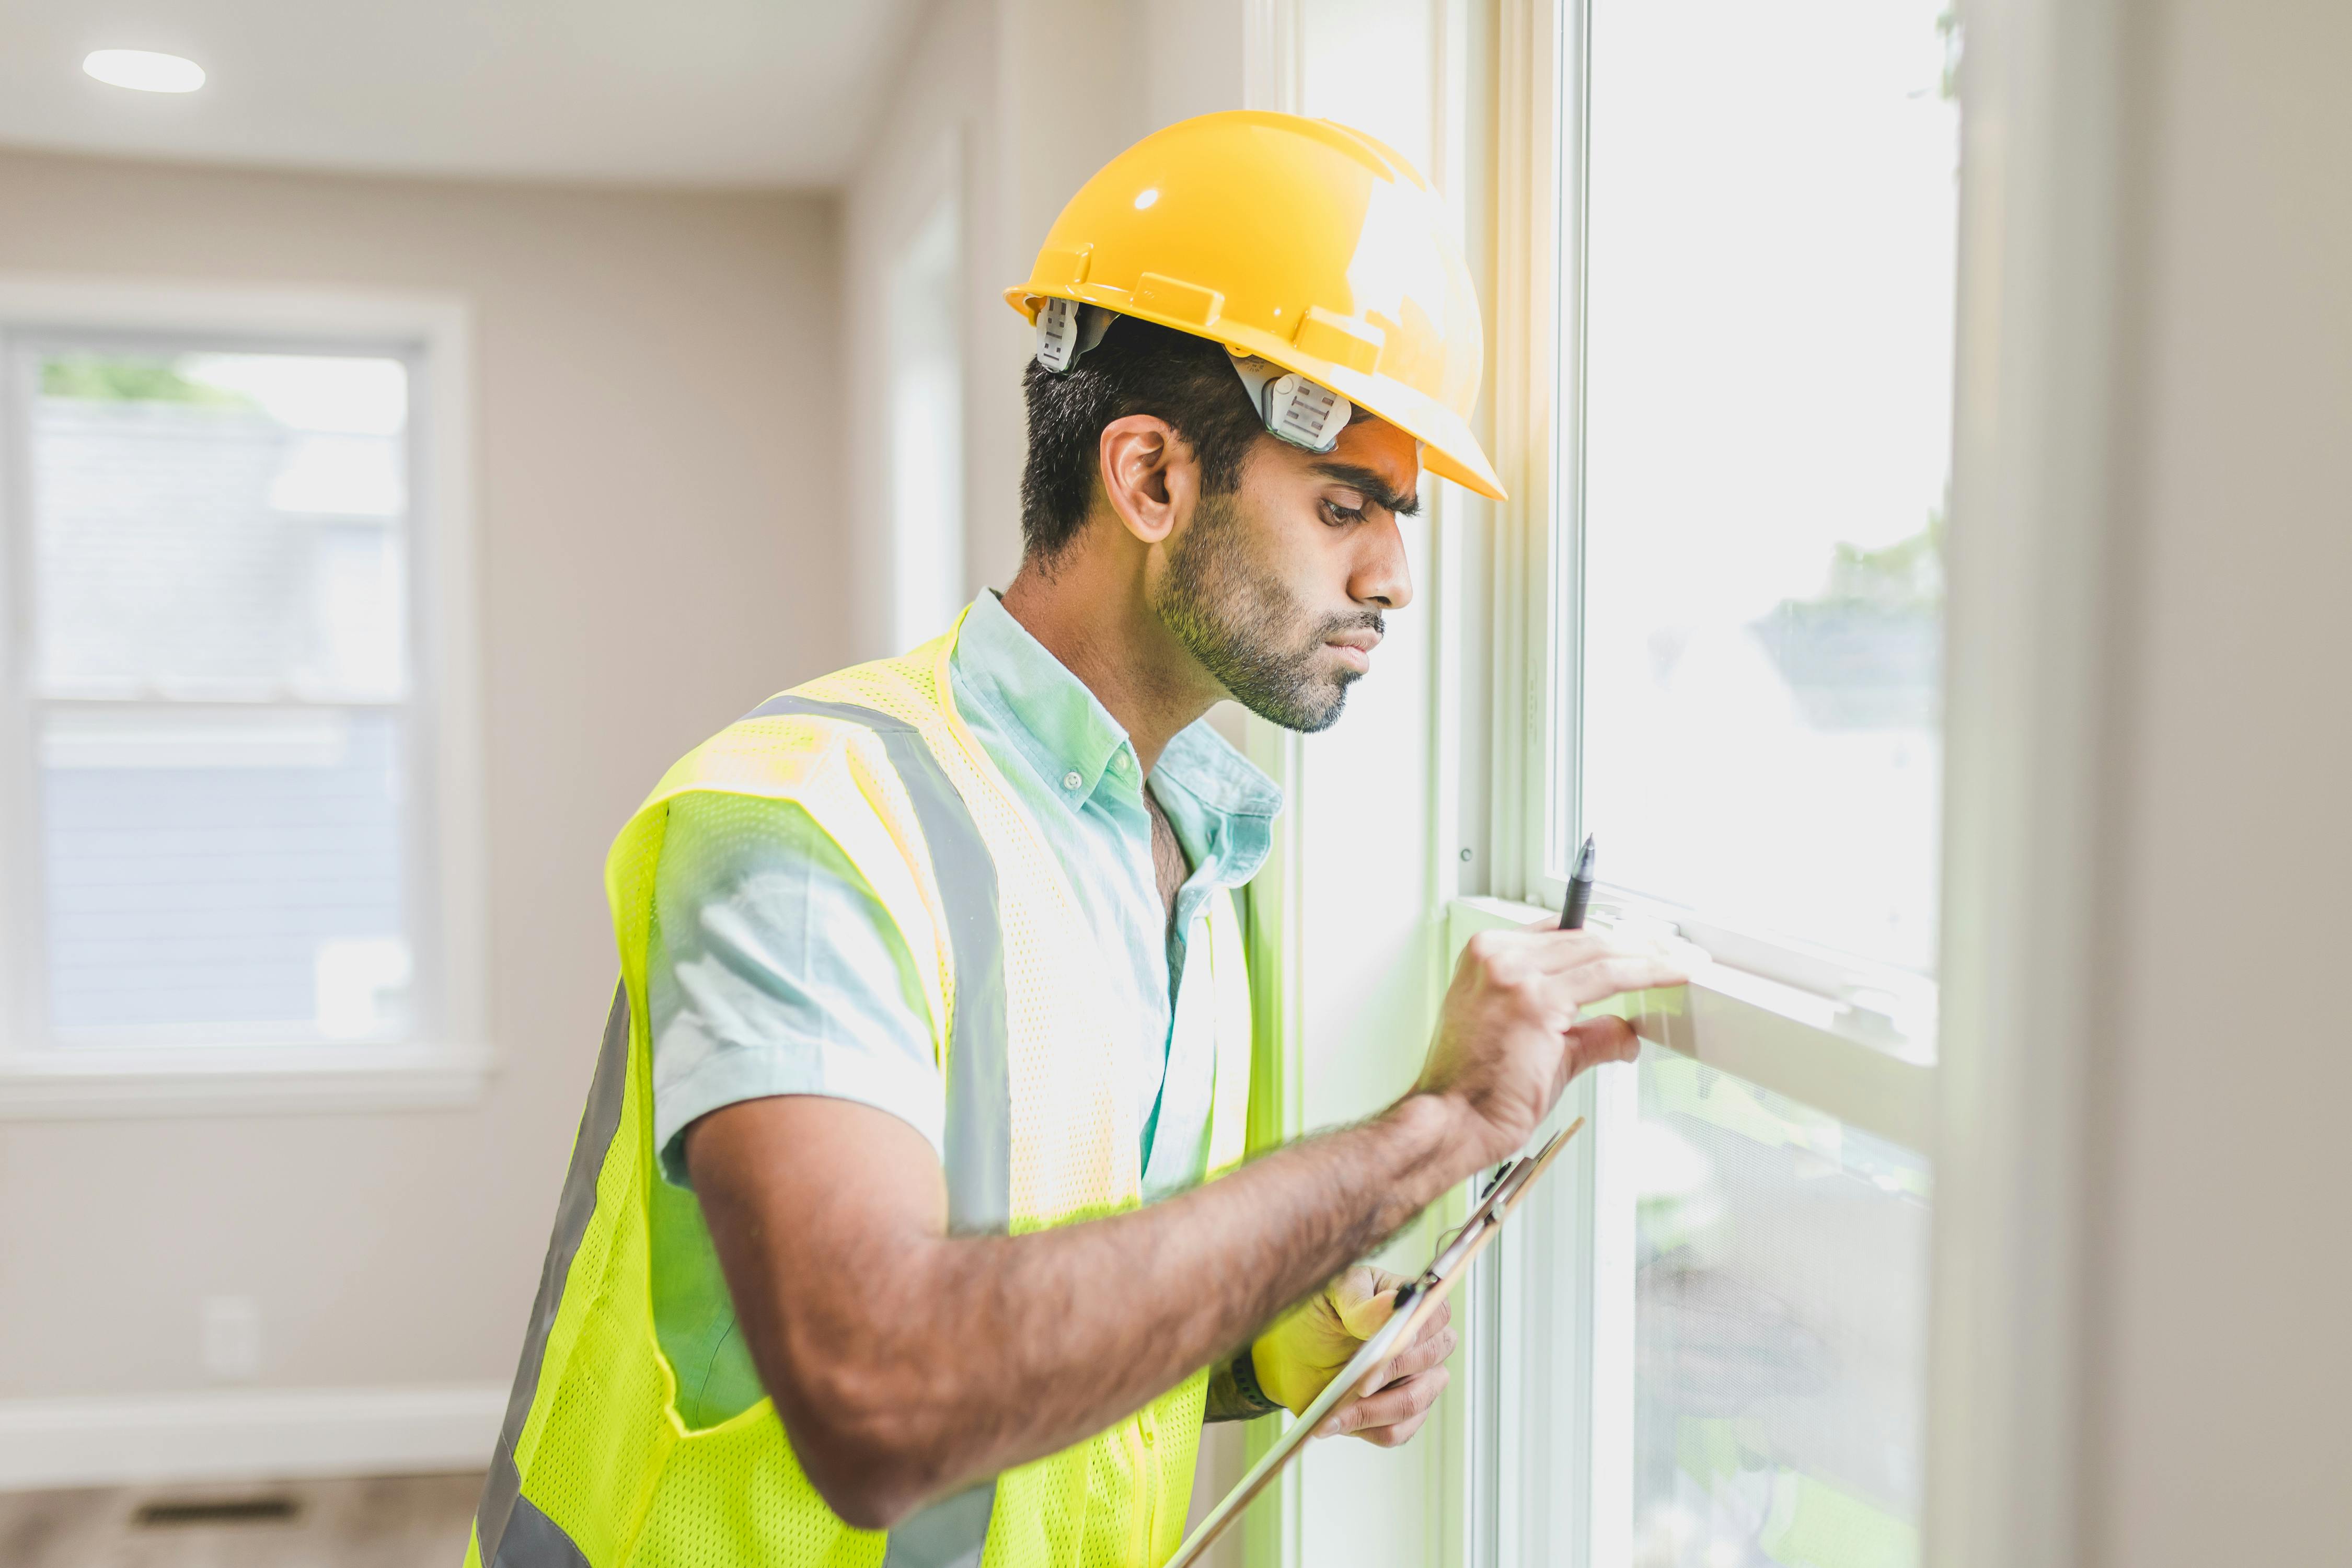 Free Construction Worker in Yellow Safety Vest and Helmet Checking Glass Window of a House Stock Photo